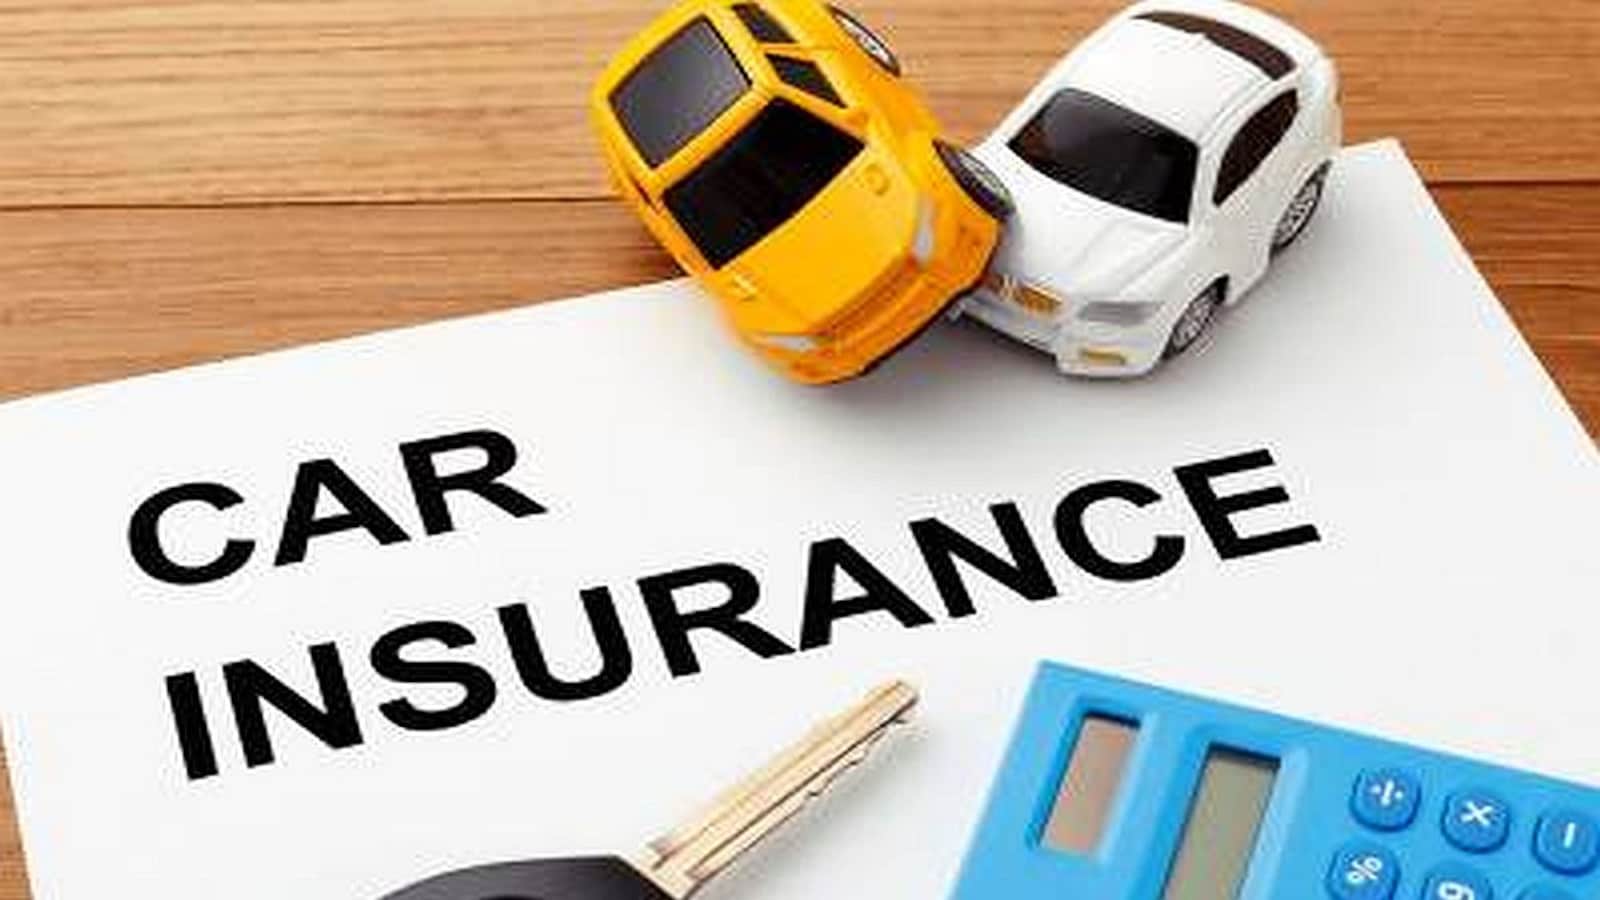 Buying a car after August 1? Know the own damage policy changes in store